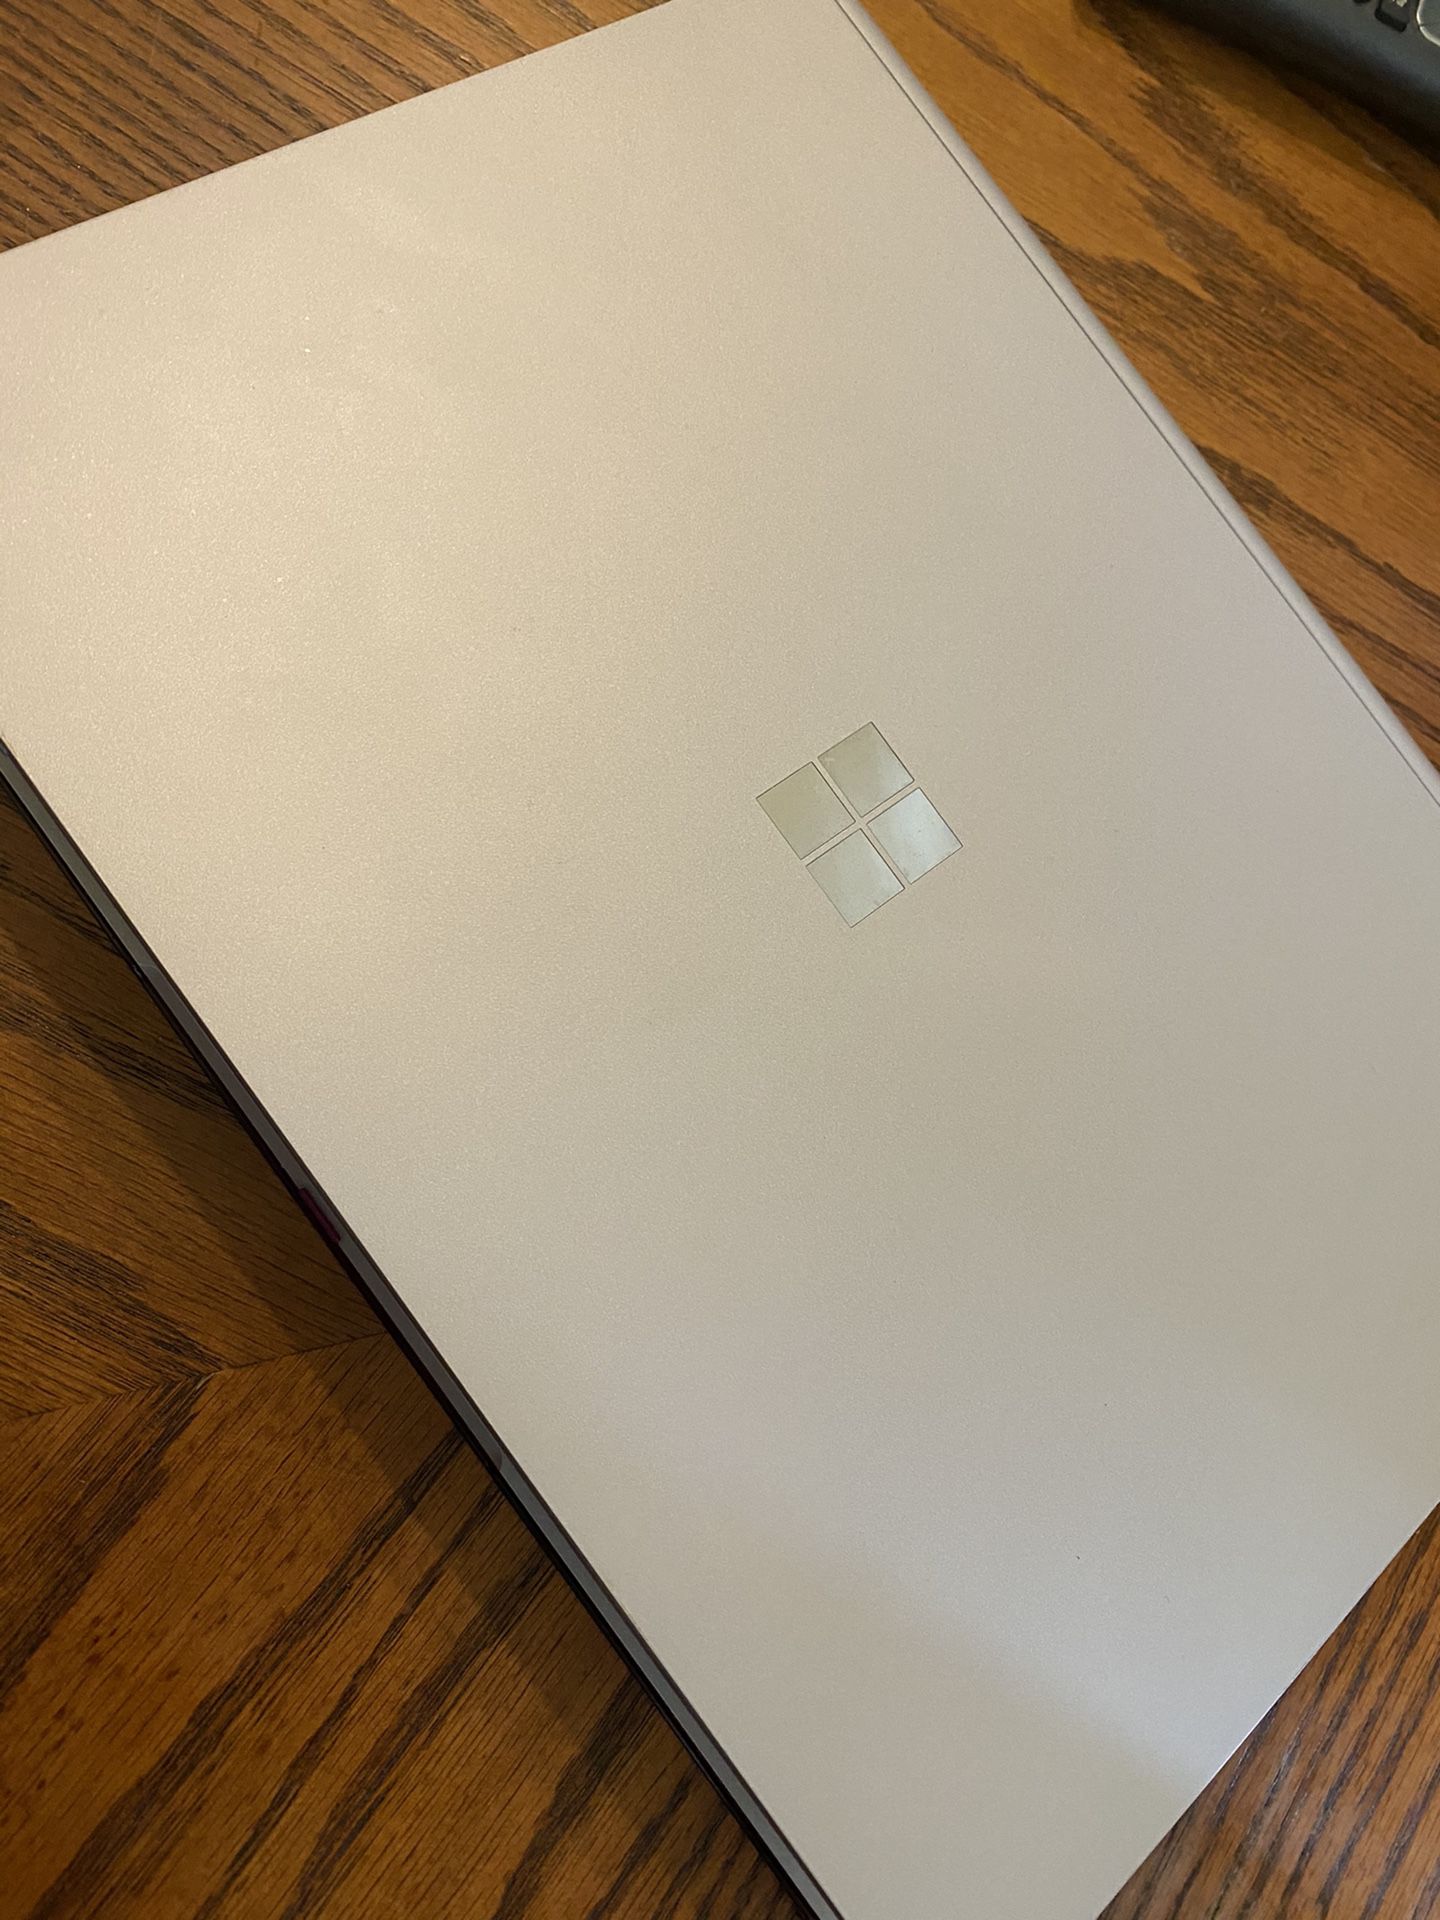 Microsoft lap top great condition